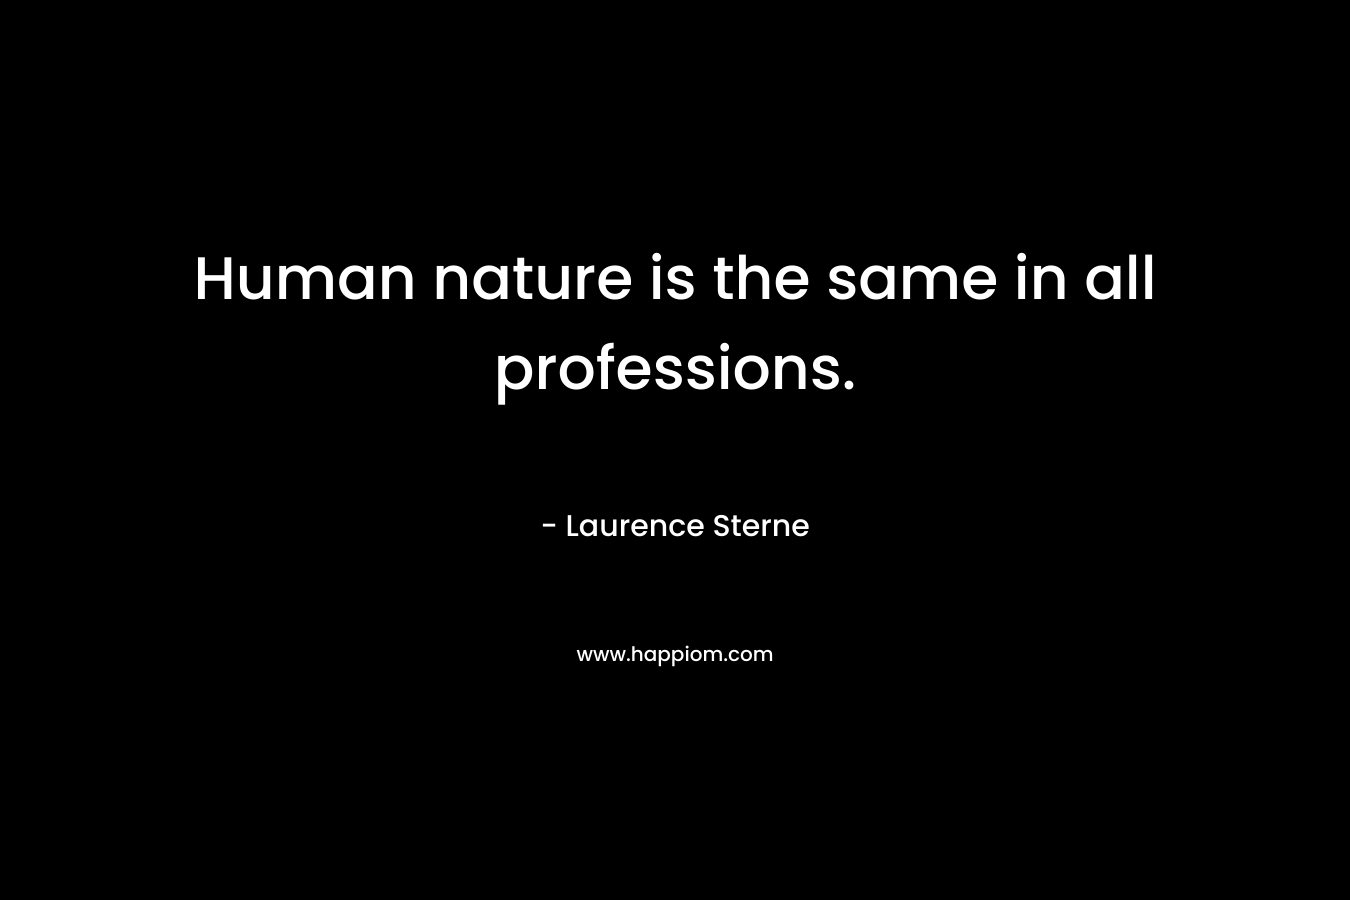 Human nature is the same in all professions.